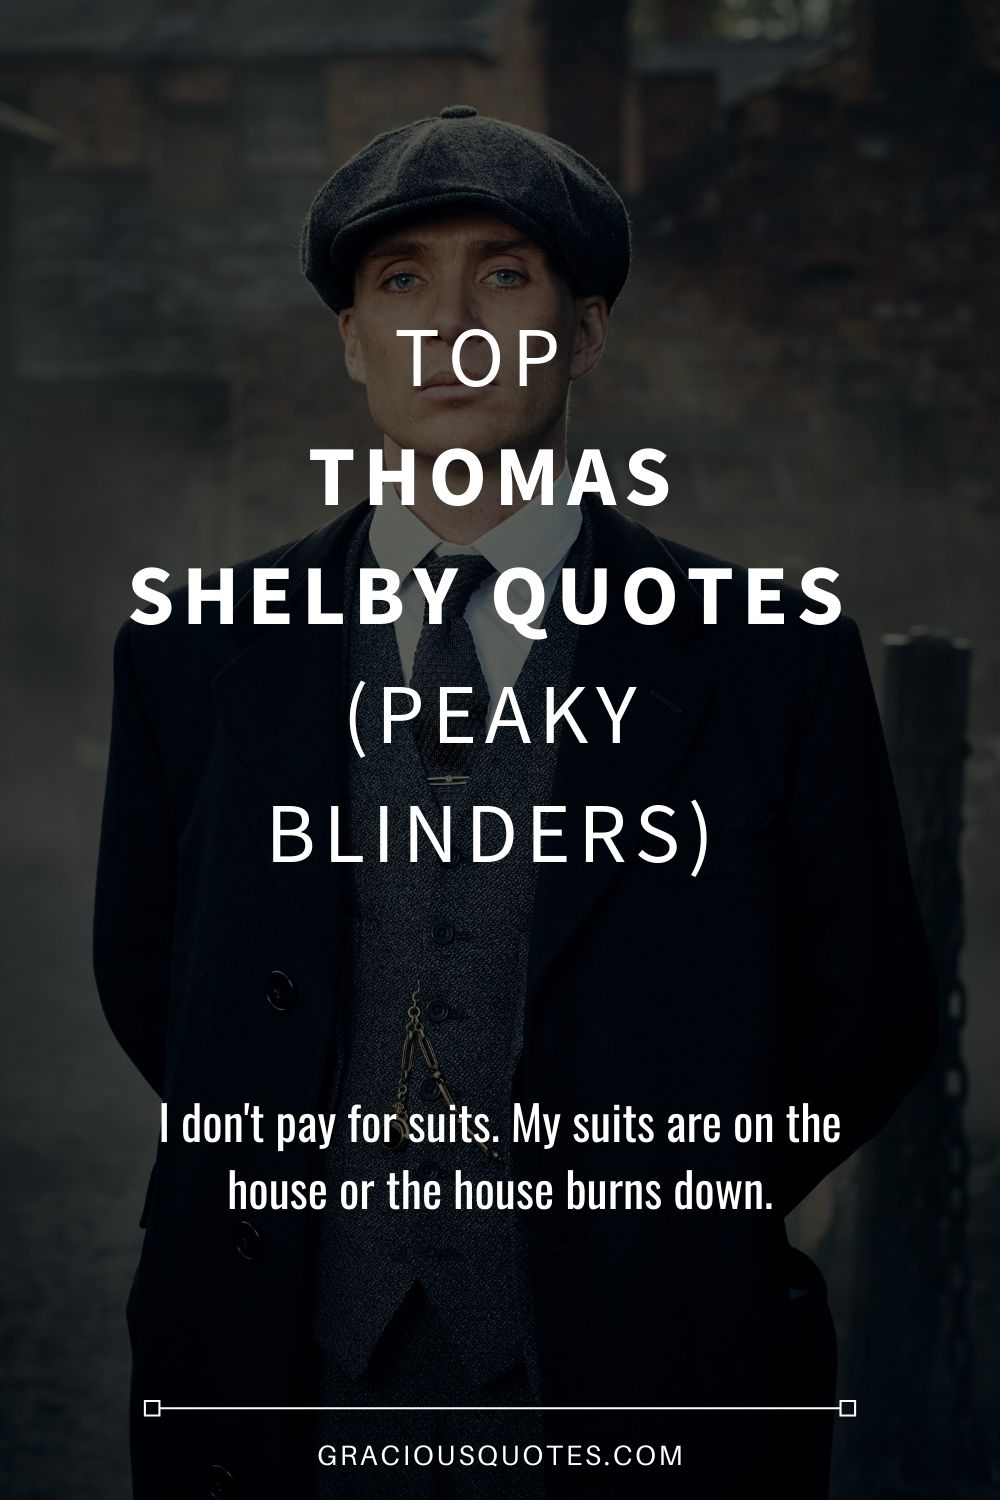 Top 31 Thomas Shelby Quotes (PEAKY BLINDERS)